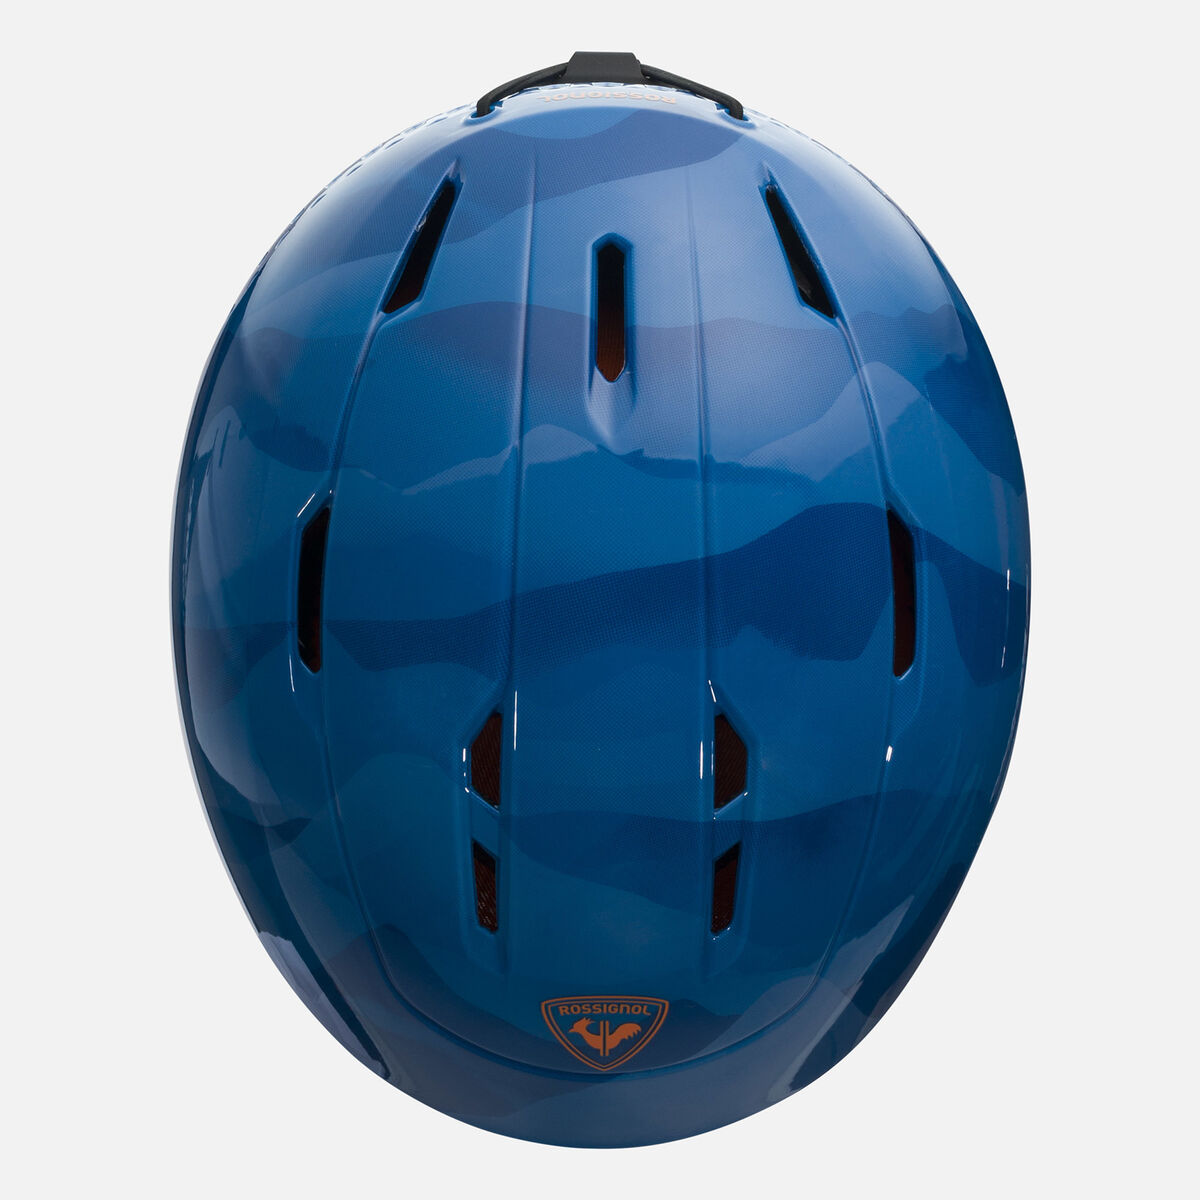 Rossignol CASCO BAMBINO WHOOPEE IMPACTS Blue